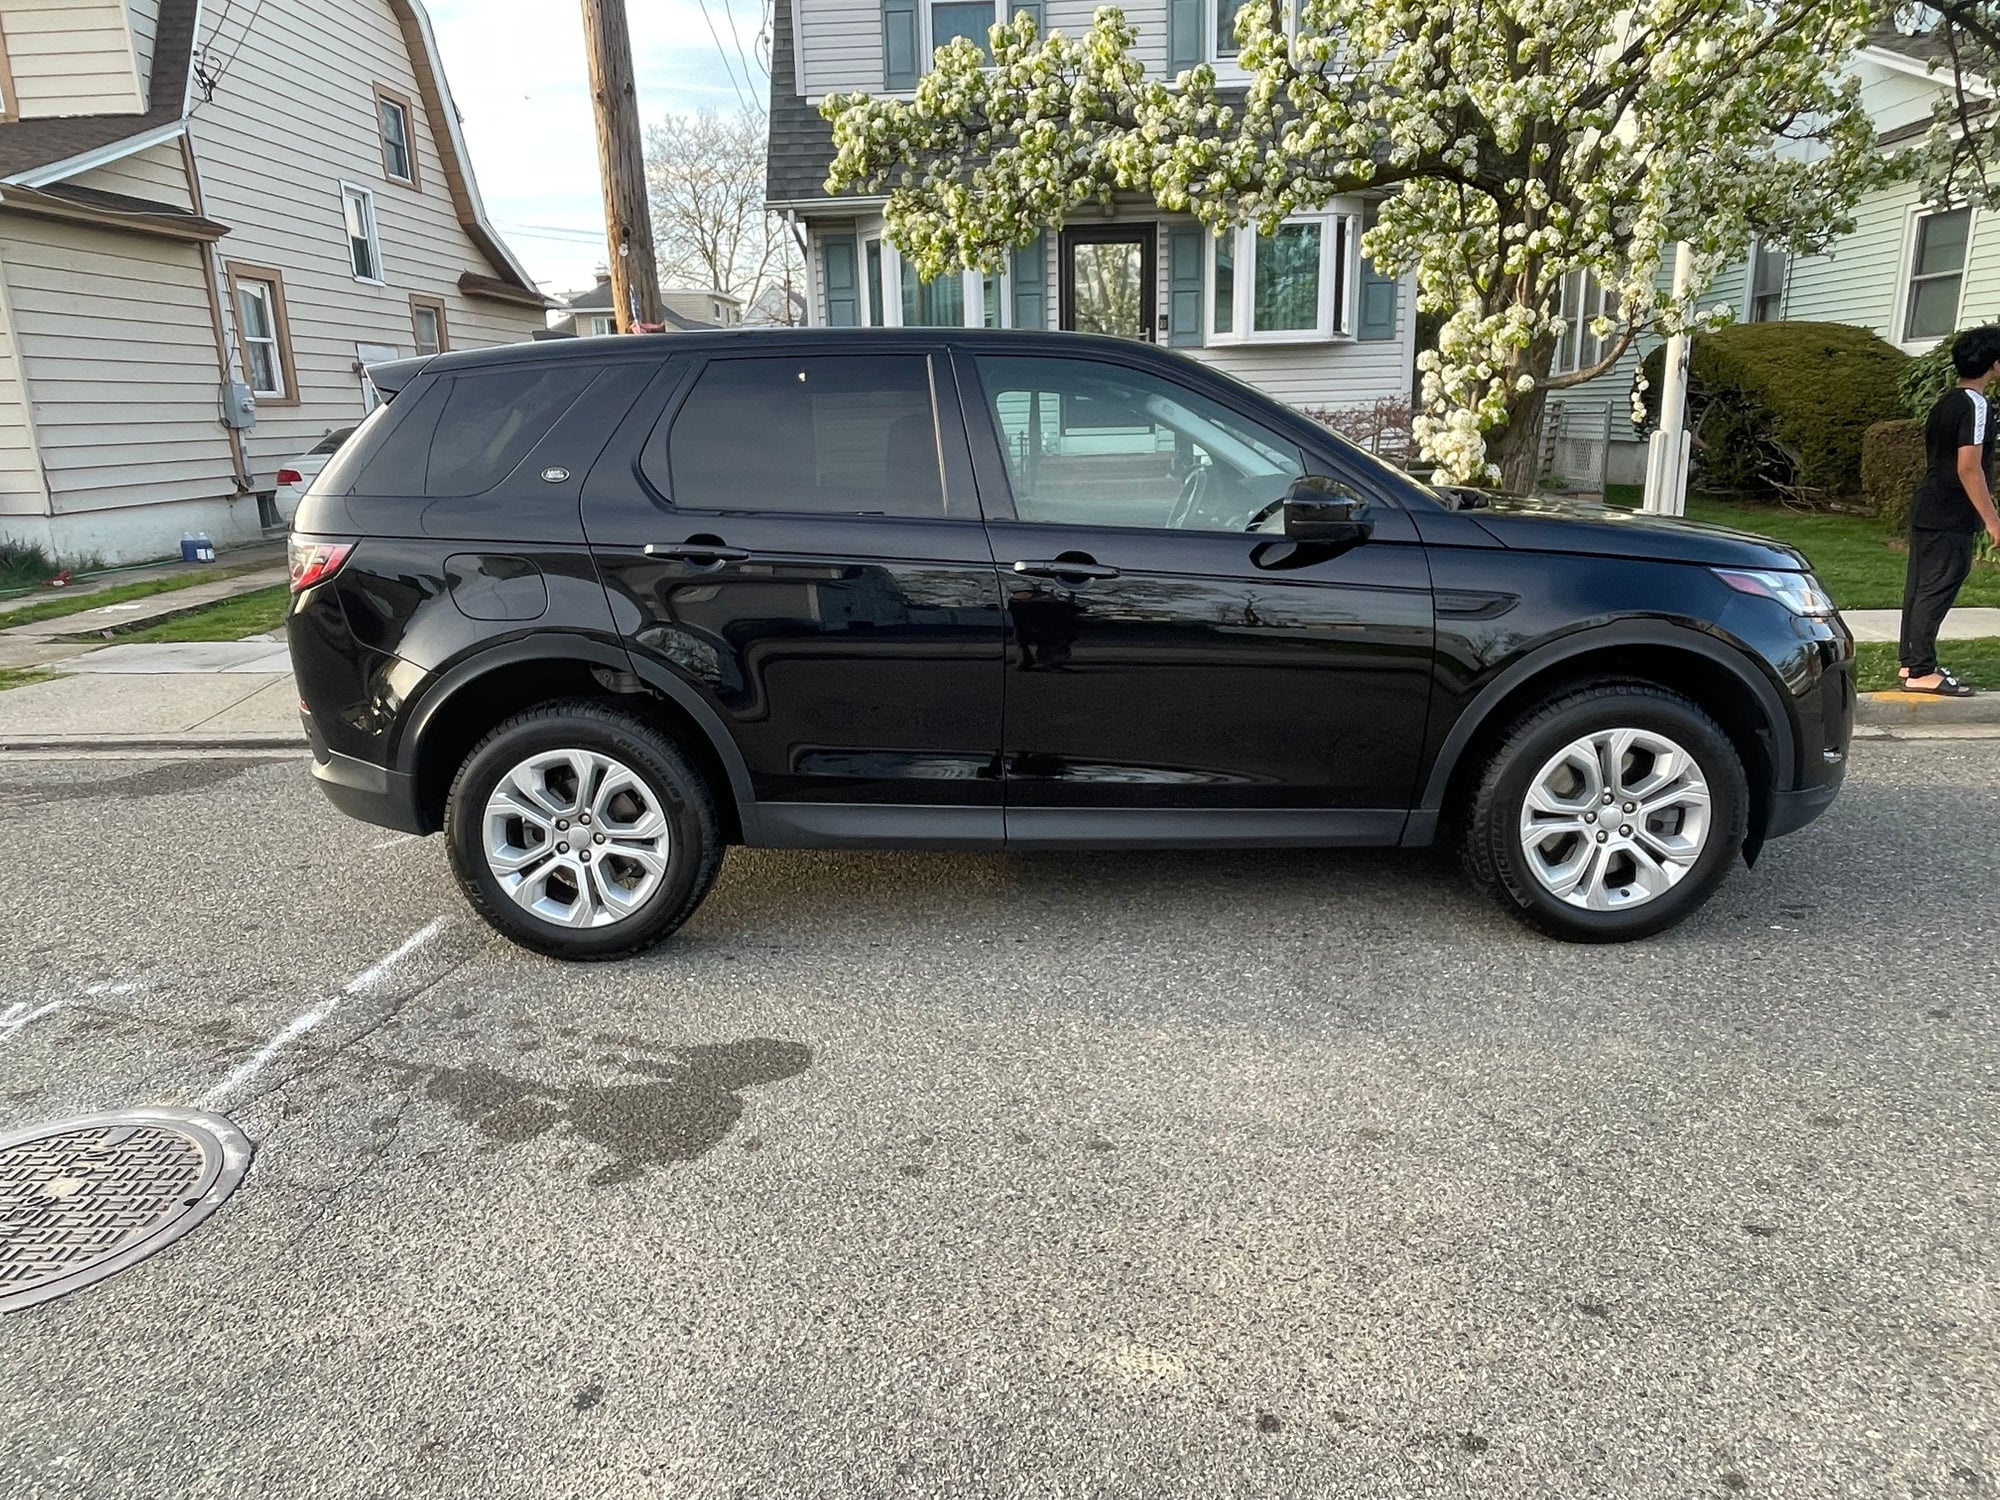 2020 Land Rover Discovery Sport - 2020 discovery sport p250 - Used - VIN SALCK2FXXLH864270 - 34,000 Miles - 4 cyl - 4WD - Automatic - SUV - Black - Freeport, NY 11735, United States